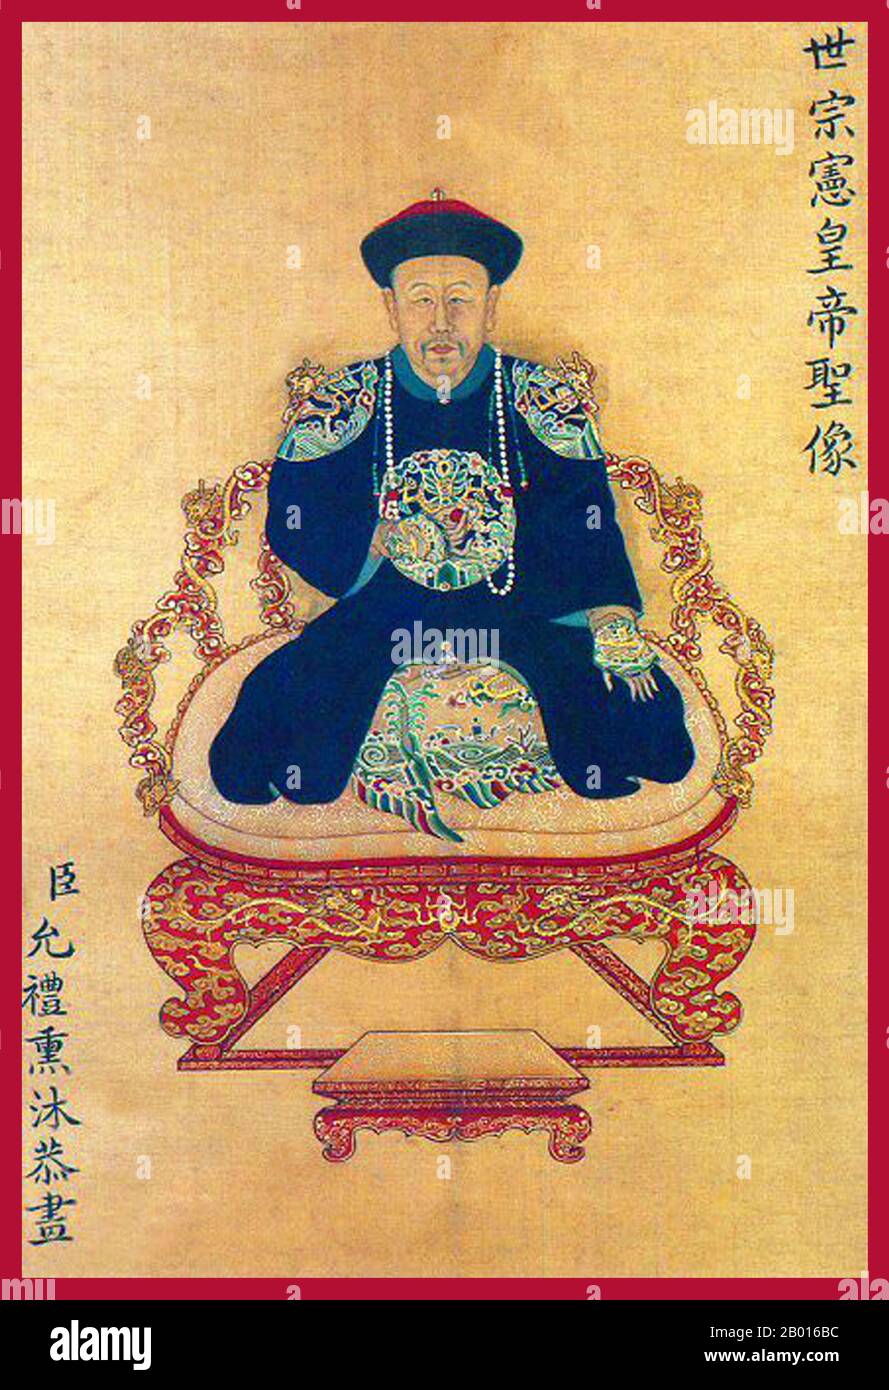 China: Emperor Yongzheng (13 December 1678 – 8 October 1735), 5th ruler of the Qing Dynasty (r. 1722-1735). Hanging scroll painting, 18th century.  The Yongzheng Emperor, born Yinzhen and temple name Shizong, was the fifth emperor of the Qing Dynasty. A hard-working ruler, Yongzheng's main goal was to create an effective government at minimum expense. Like his father, the Kangxi Emperor, Yongzheng used military force in order to preserve the dynasty's position. Suspected by historians to have usurped the throne, his reign was often called despotic, efficient and vigorous. Stock Photo